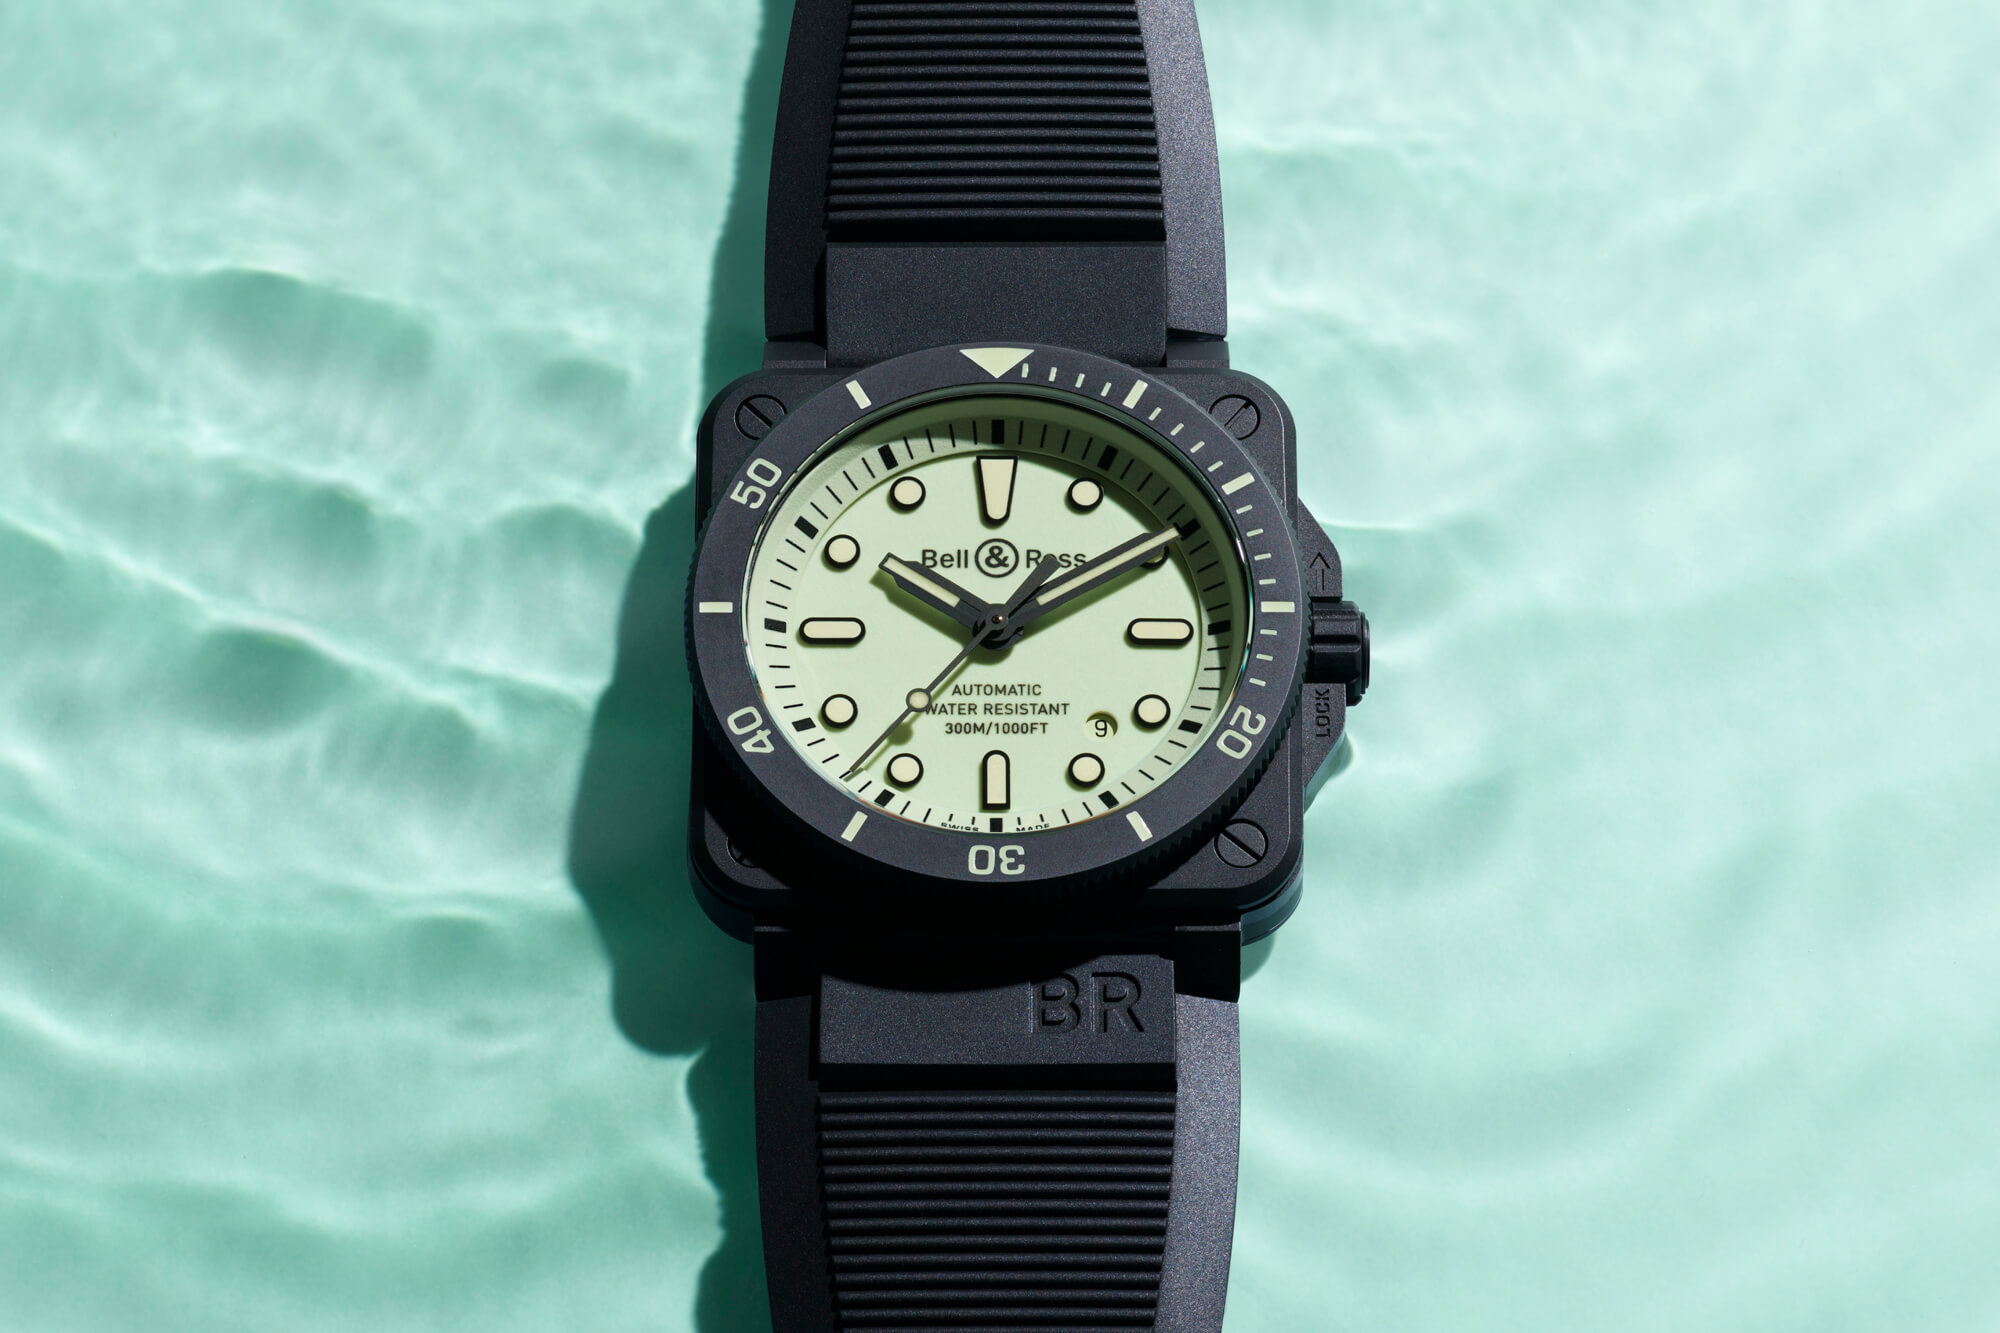 The male fake watches have black straps.